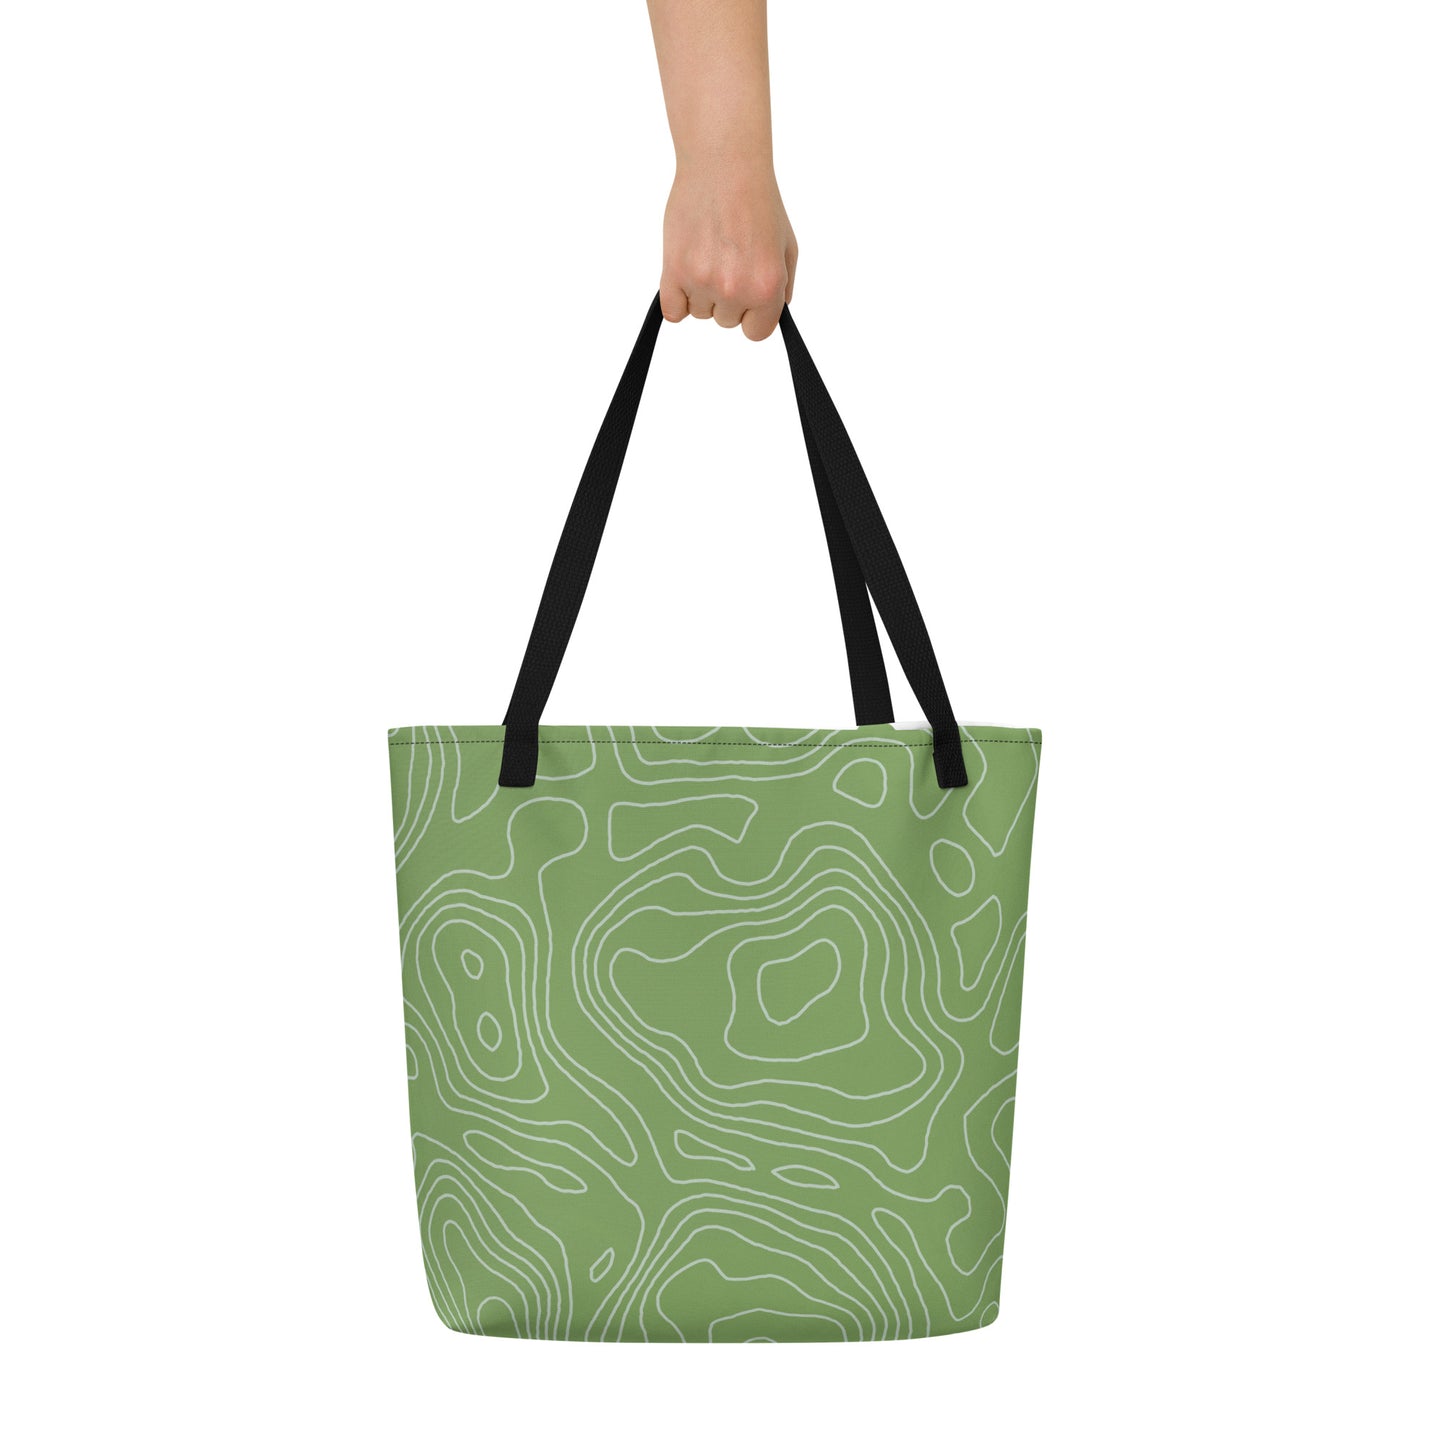 I Love Learning All-Over Green Print Large Tote Bag